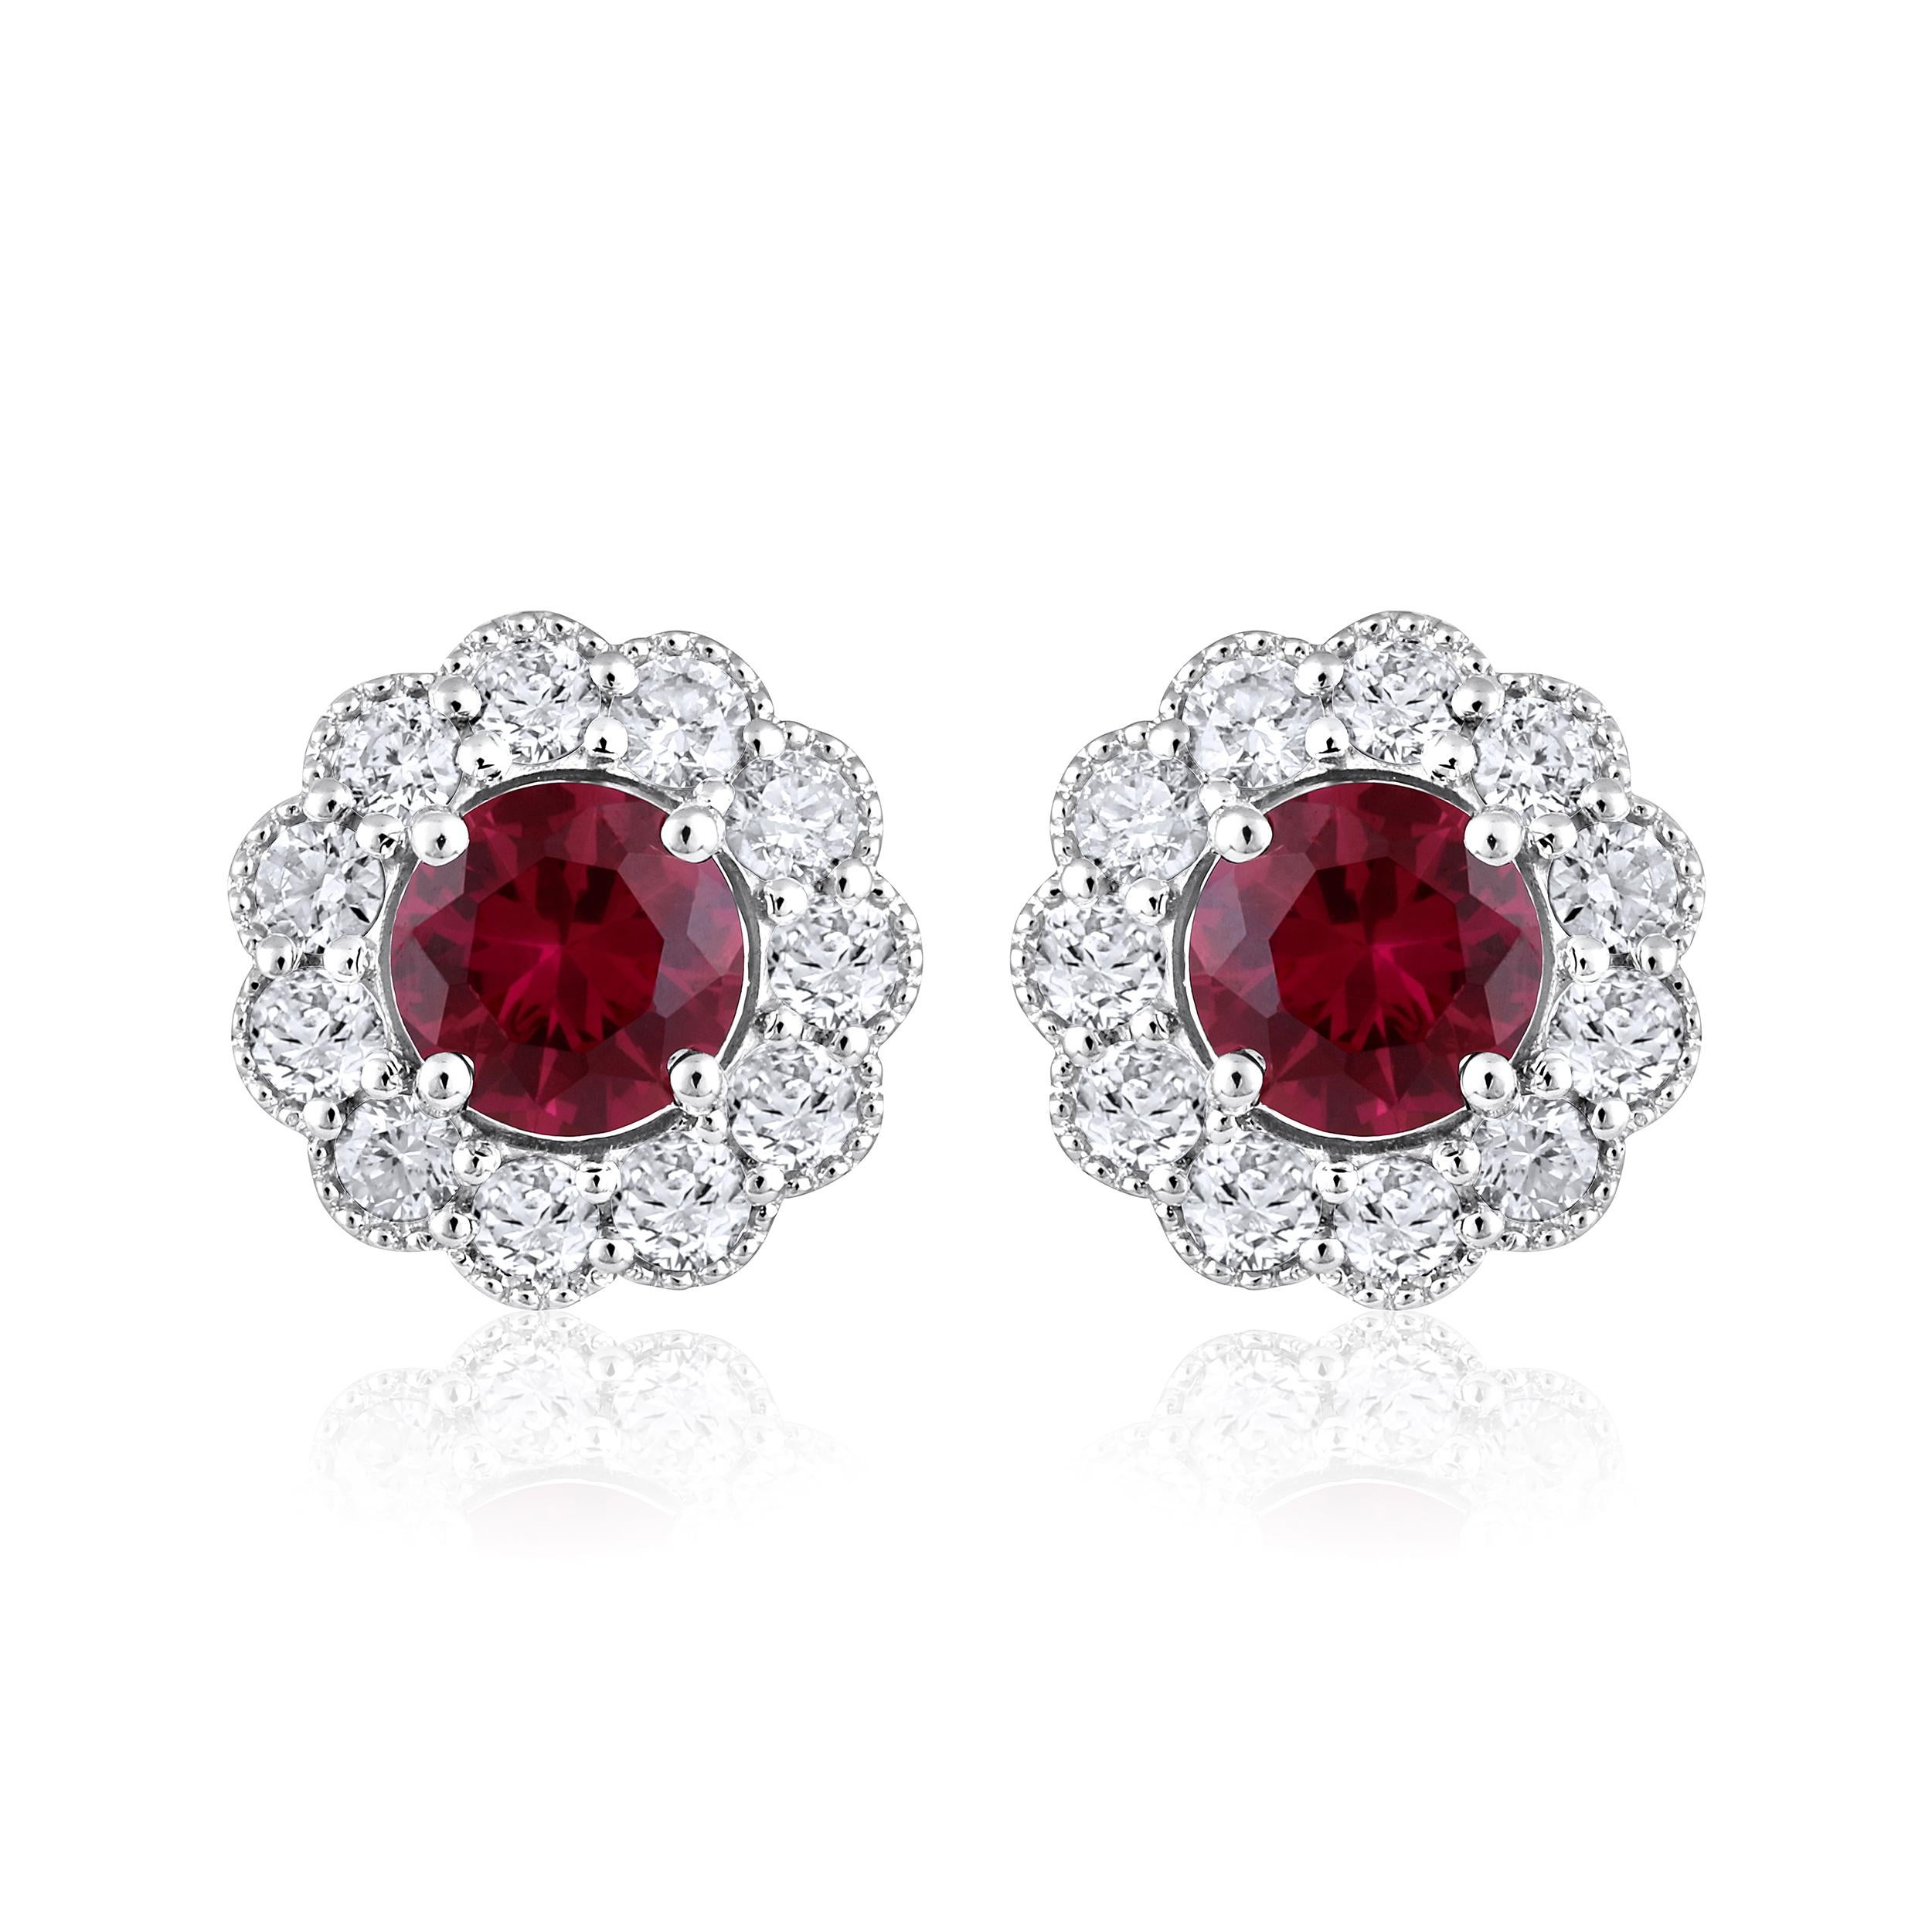 Contemporary Certified 14k Gold 1.8ct Natural Diamond W/ Lab Ruby Round Flower Stud Earrings For Sale